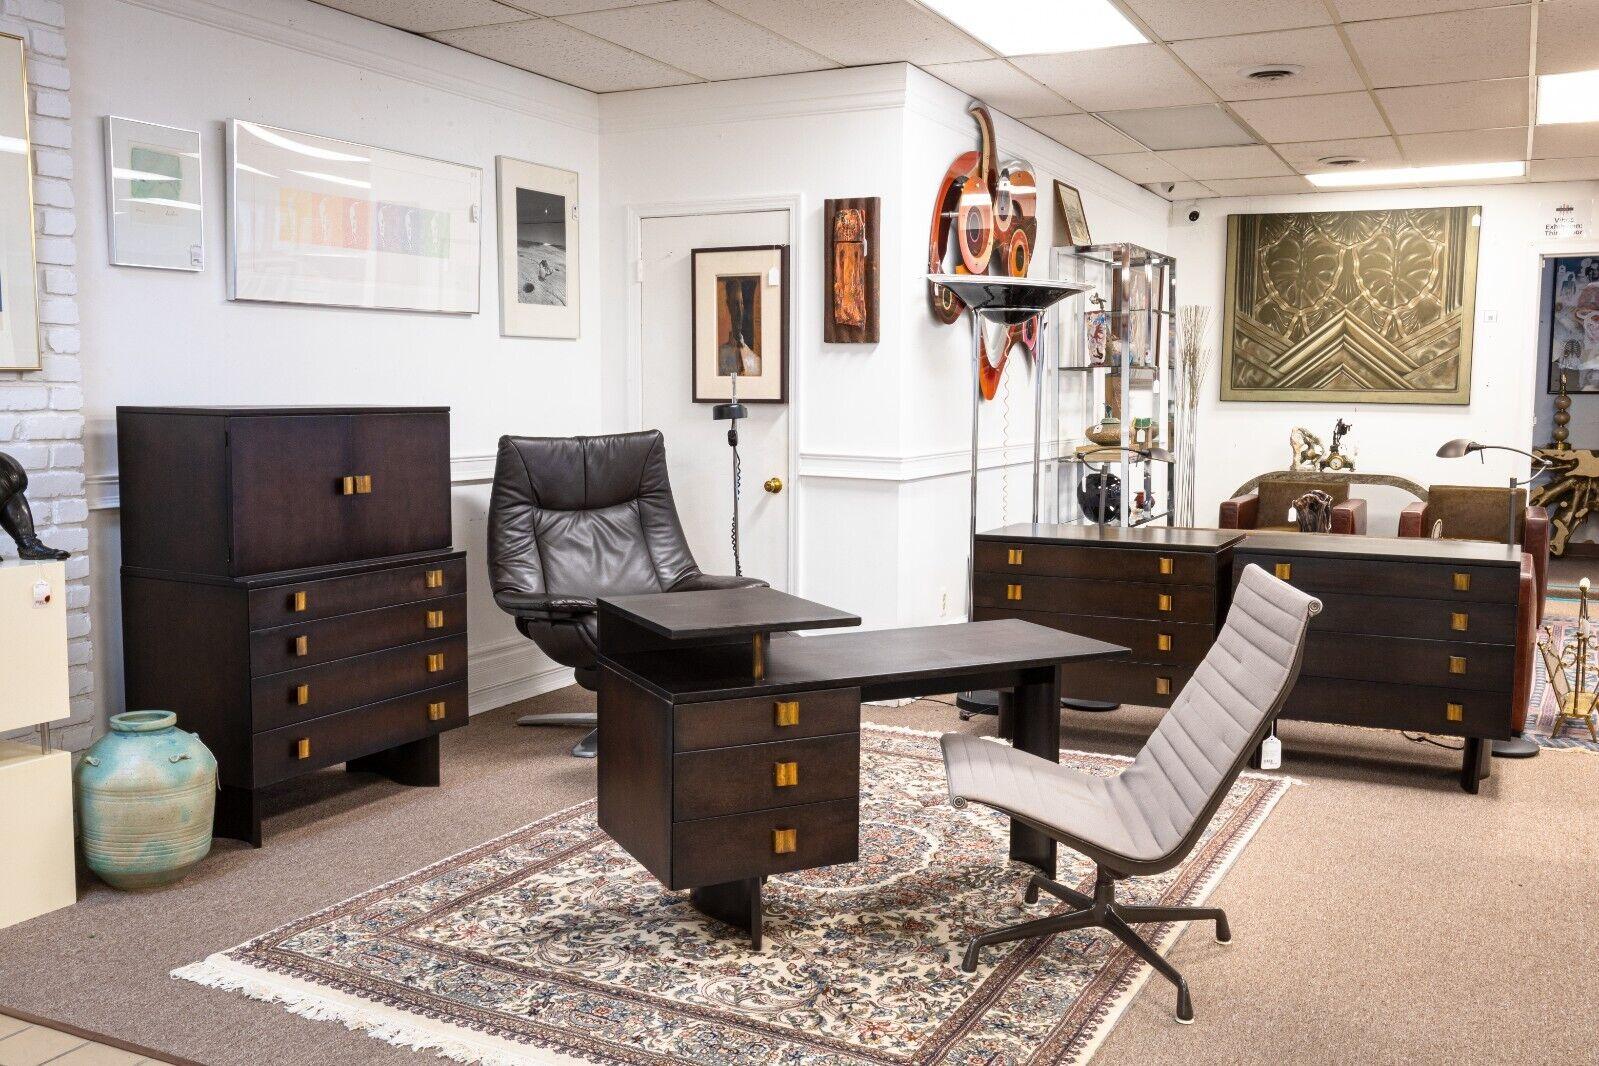 A rare Eliel Saarinen for Johnson vintage bedroom set with a desk, pair of dressers, and a highboy dresser chest cabinet. This amazing set of bedroom furniture features some incredible mid century modern furniture. All of these pieces are a part of